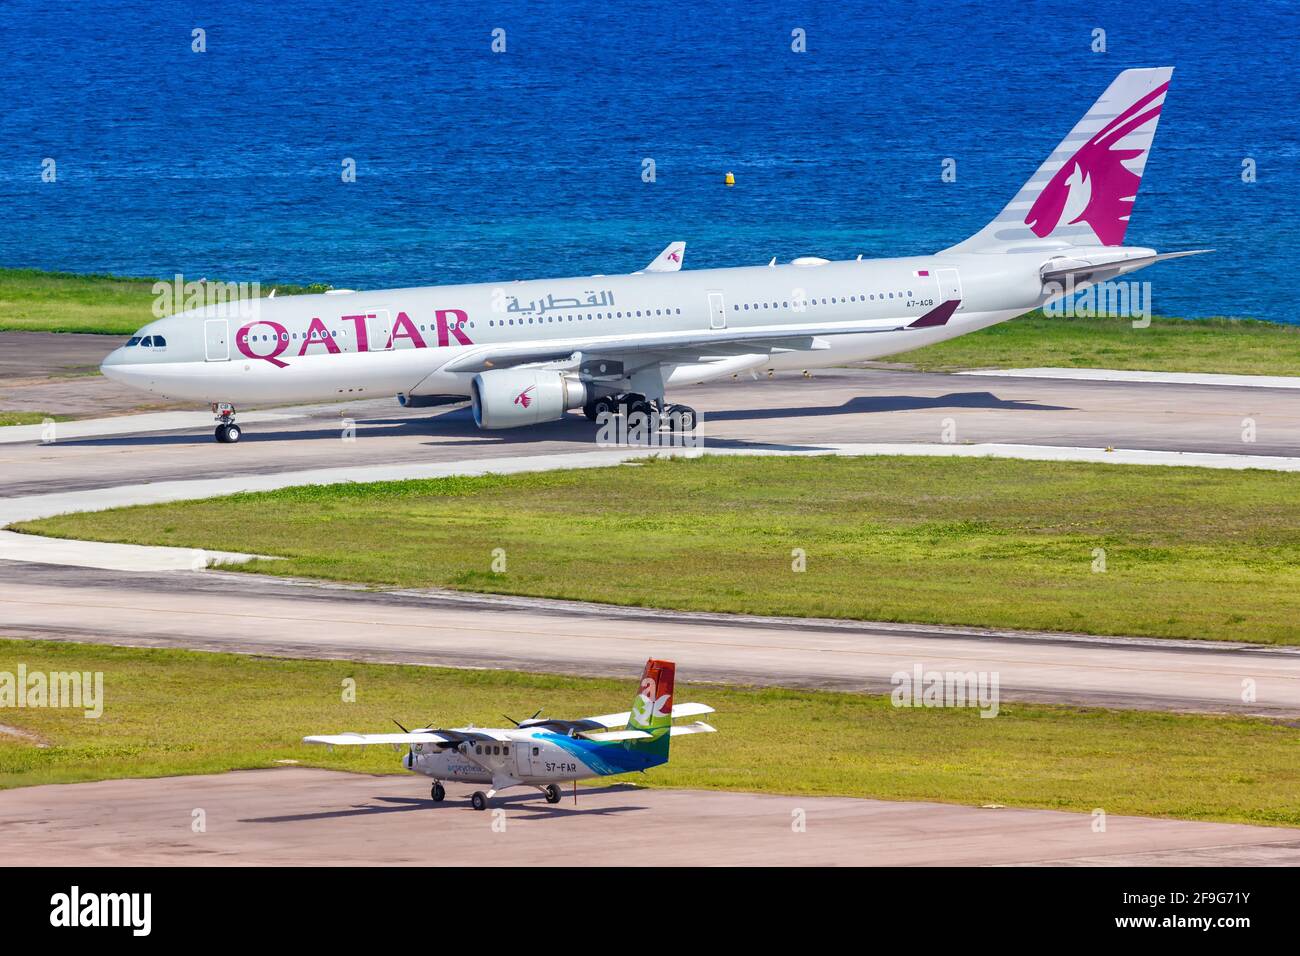 Mahe, Seychelles - November 25, 2017: Qatar Airways Airbus A330 airplane at Seychelles International Airport (SEZ) in the Seychelles. Airbus is a Euro Stock Photo